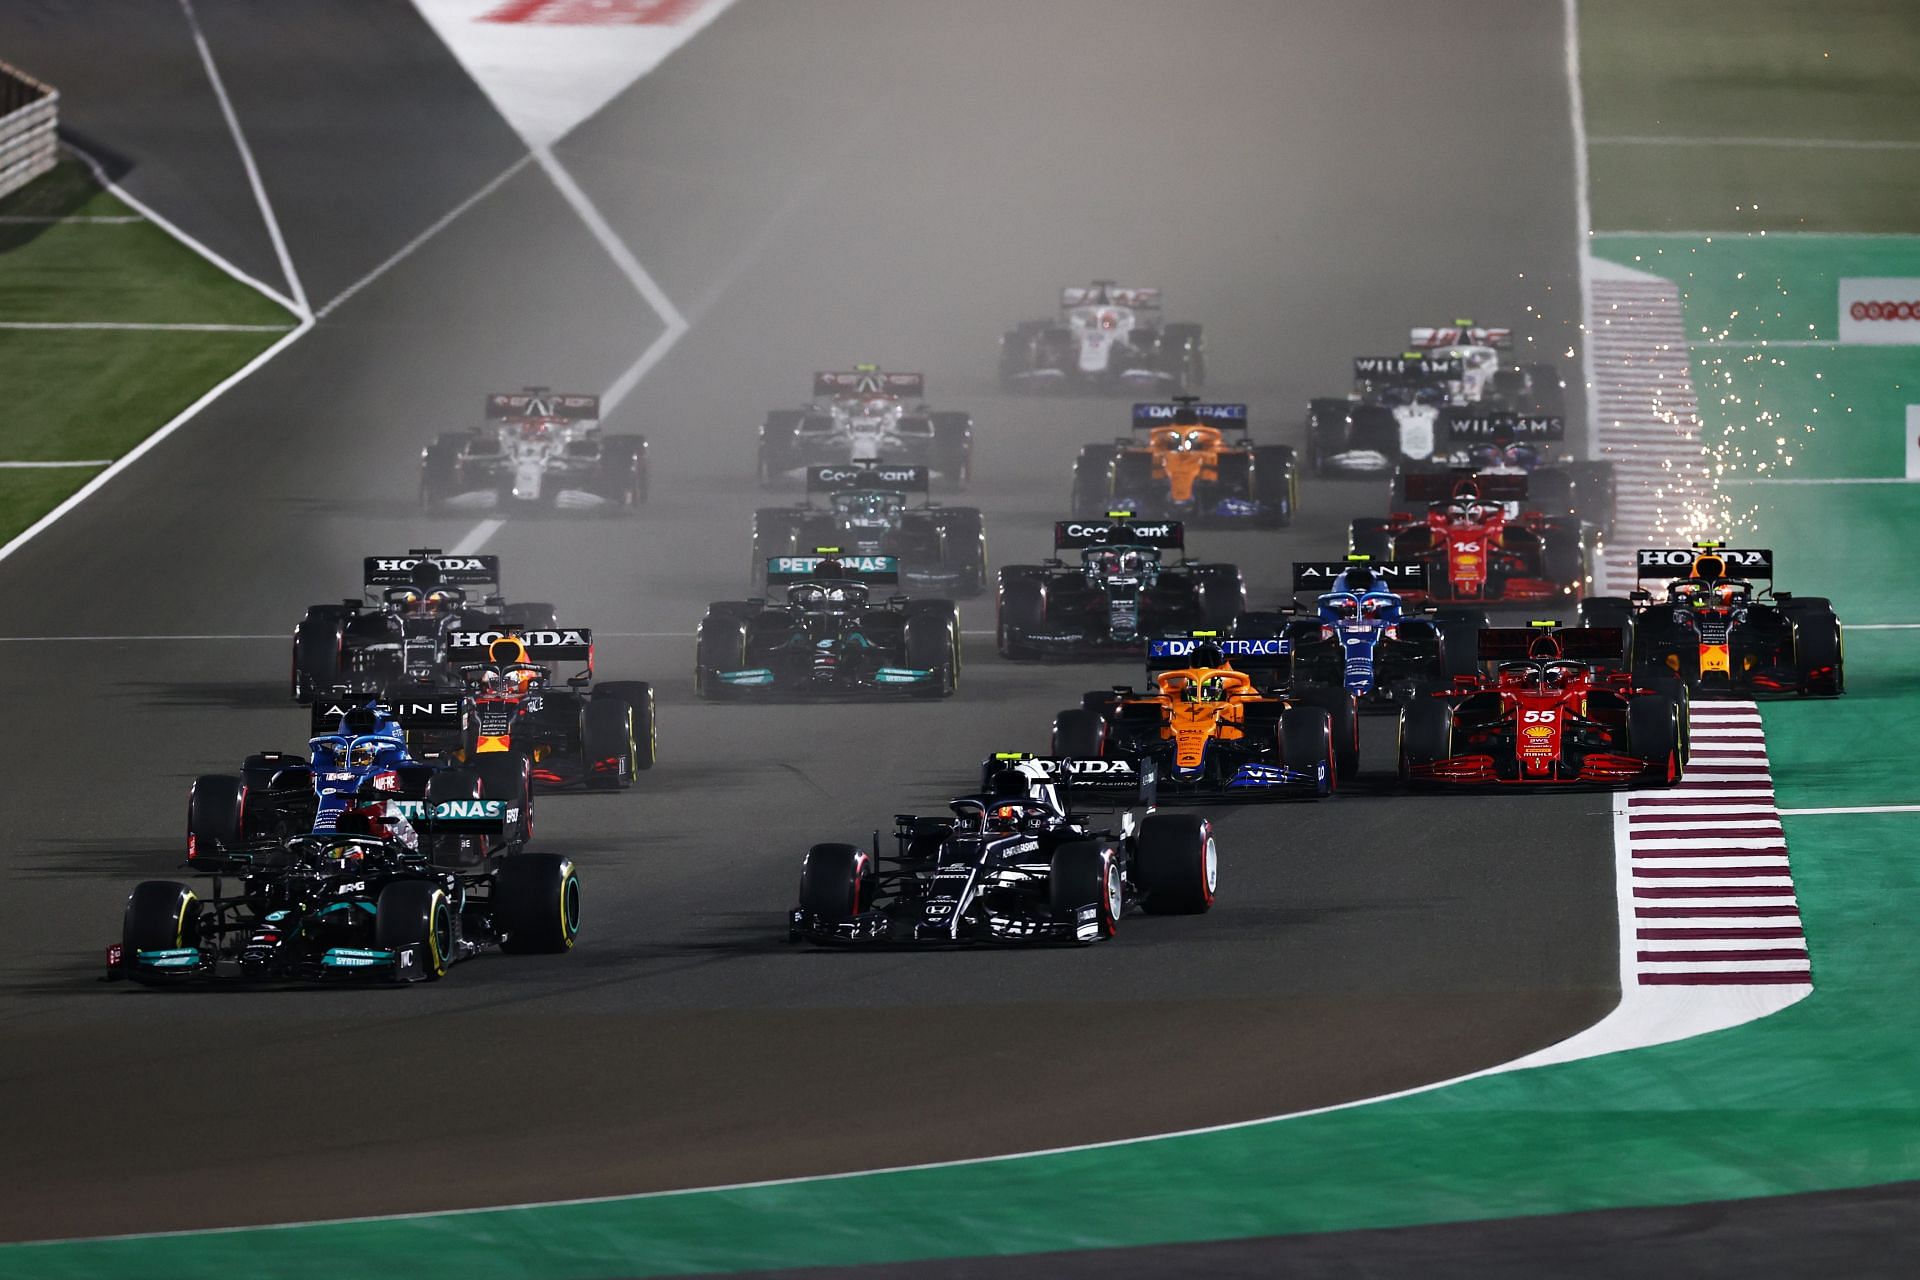 F1 Grand Prix of Qatar - Lewis Hamilton leads the pack into Turn 1.